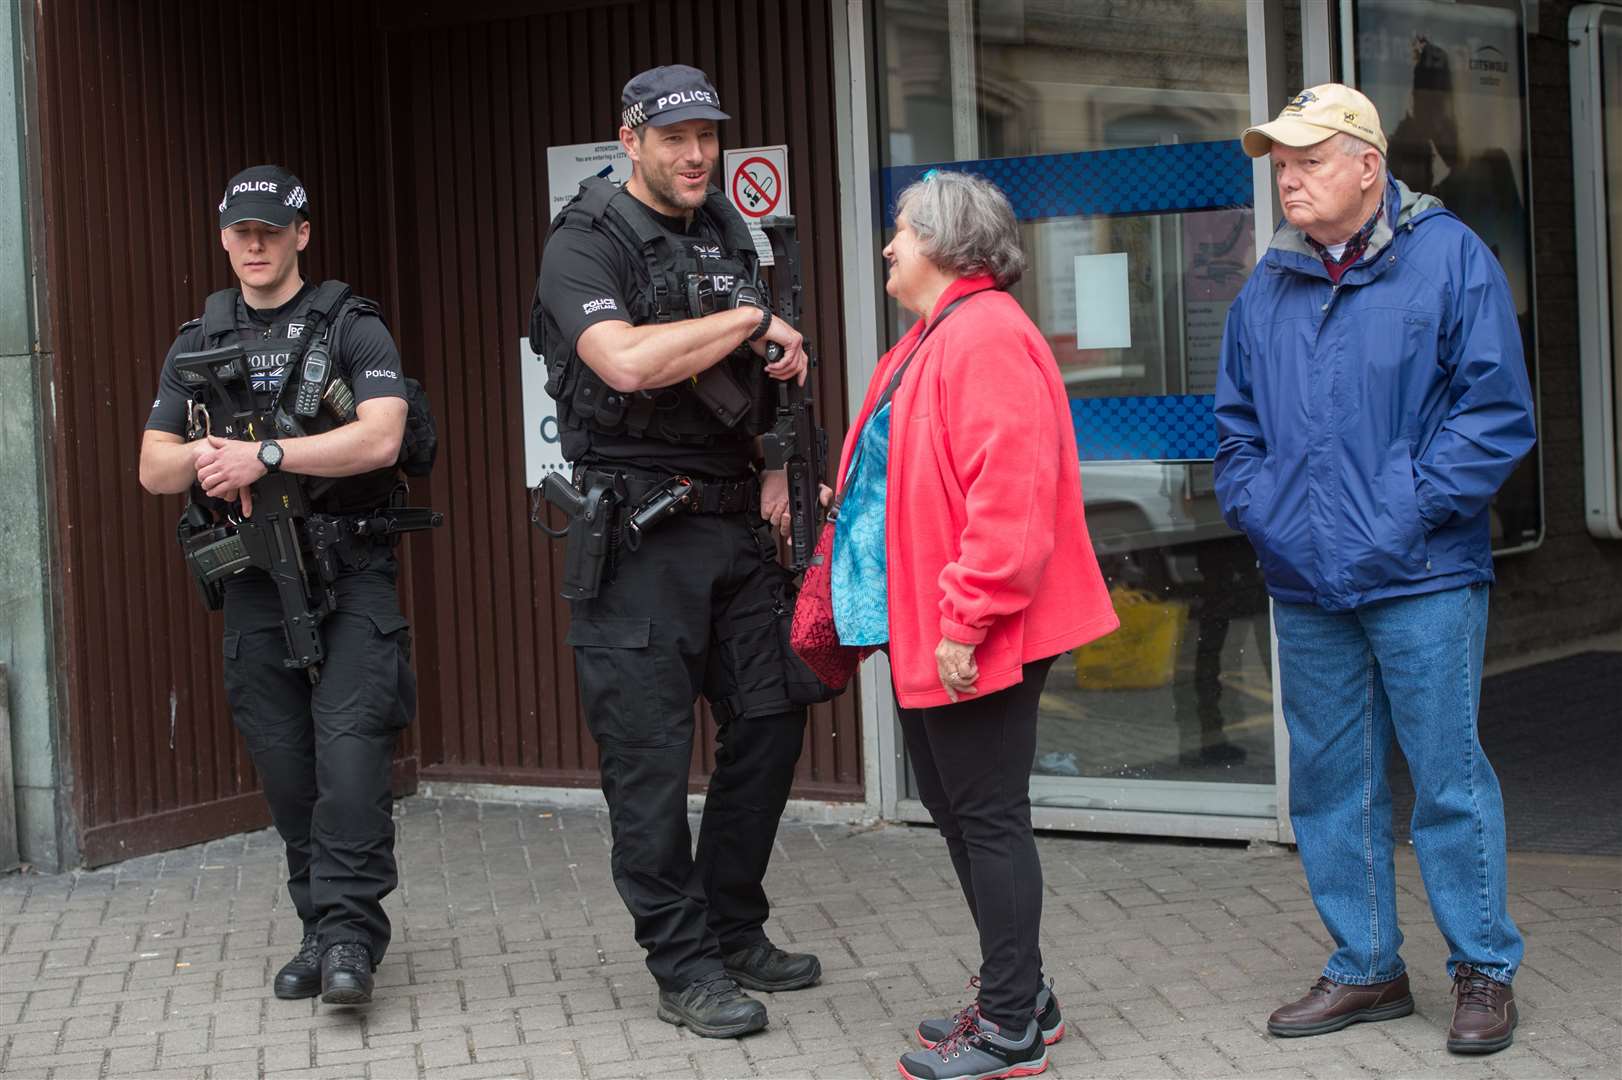 Armed Police outside Inverness Railway Station - Chief Superintendent Shepherd insists protecting people remains the number one priority. Picture: Callum Mackay.